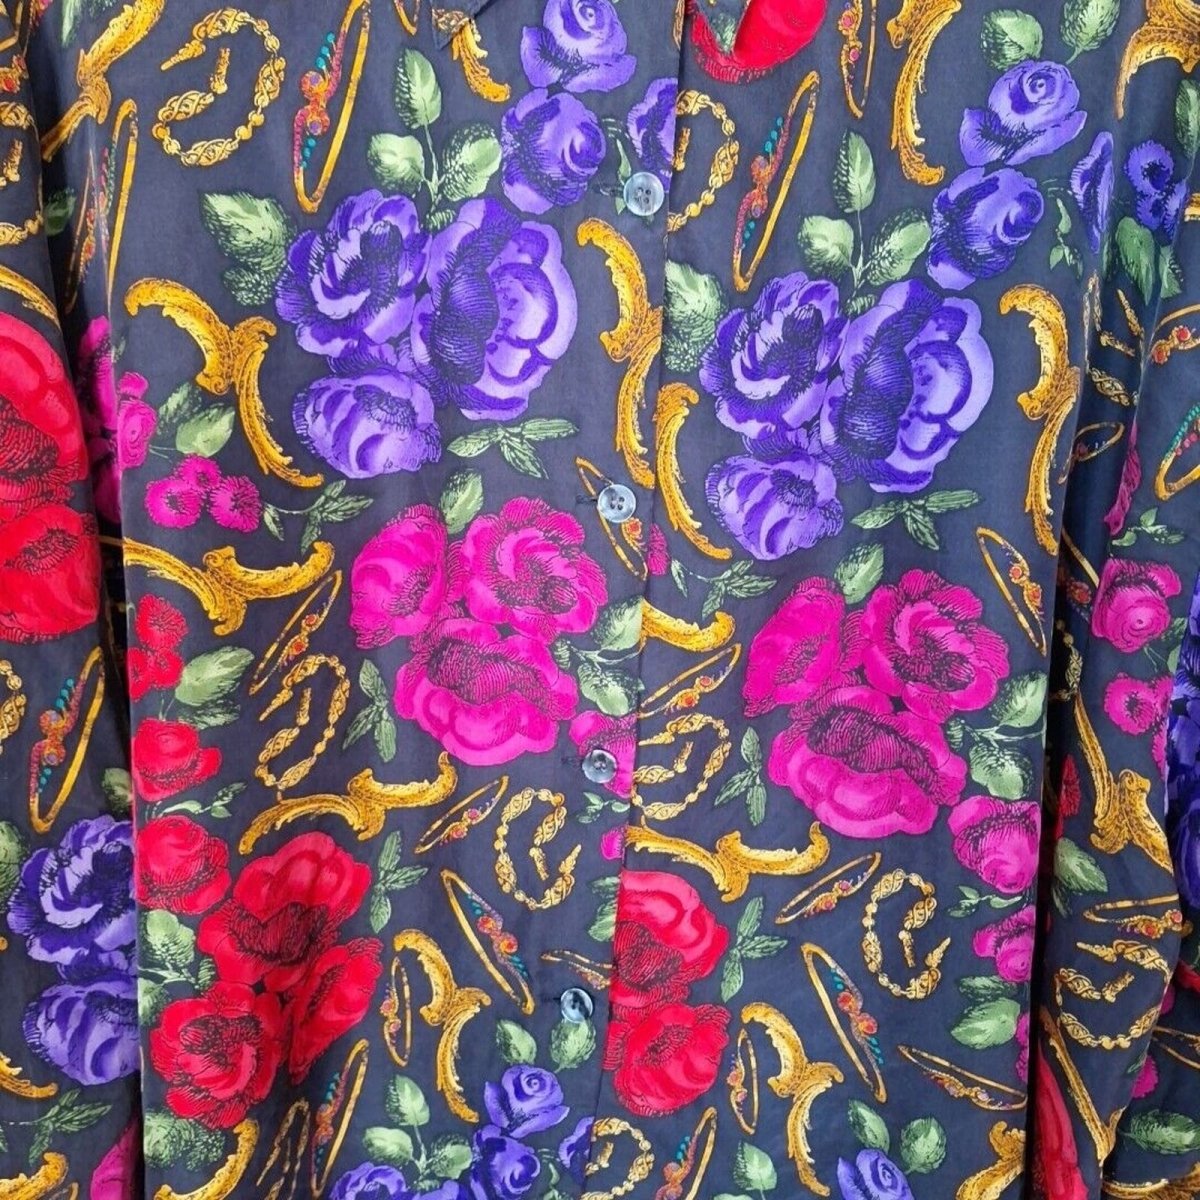 Vintage 80s/90s All Silk Blouse with Floral and Gold Leaf Detail Women Plus Size 26/28 - themallvintage The Mall Vintage